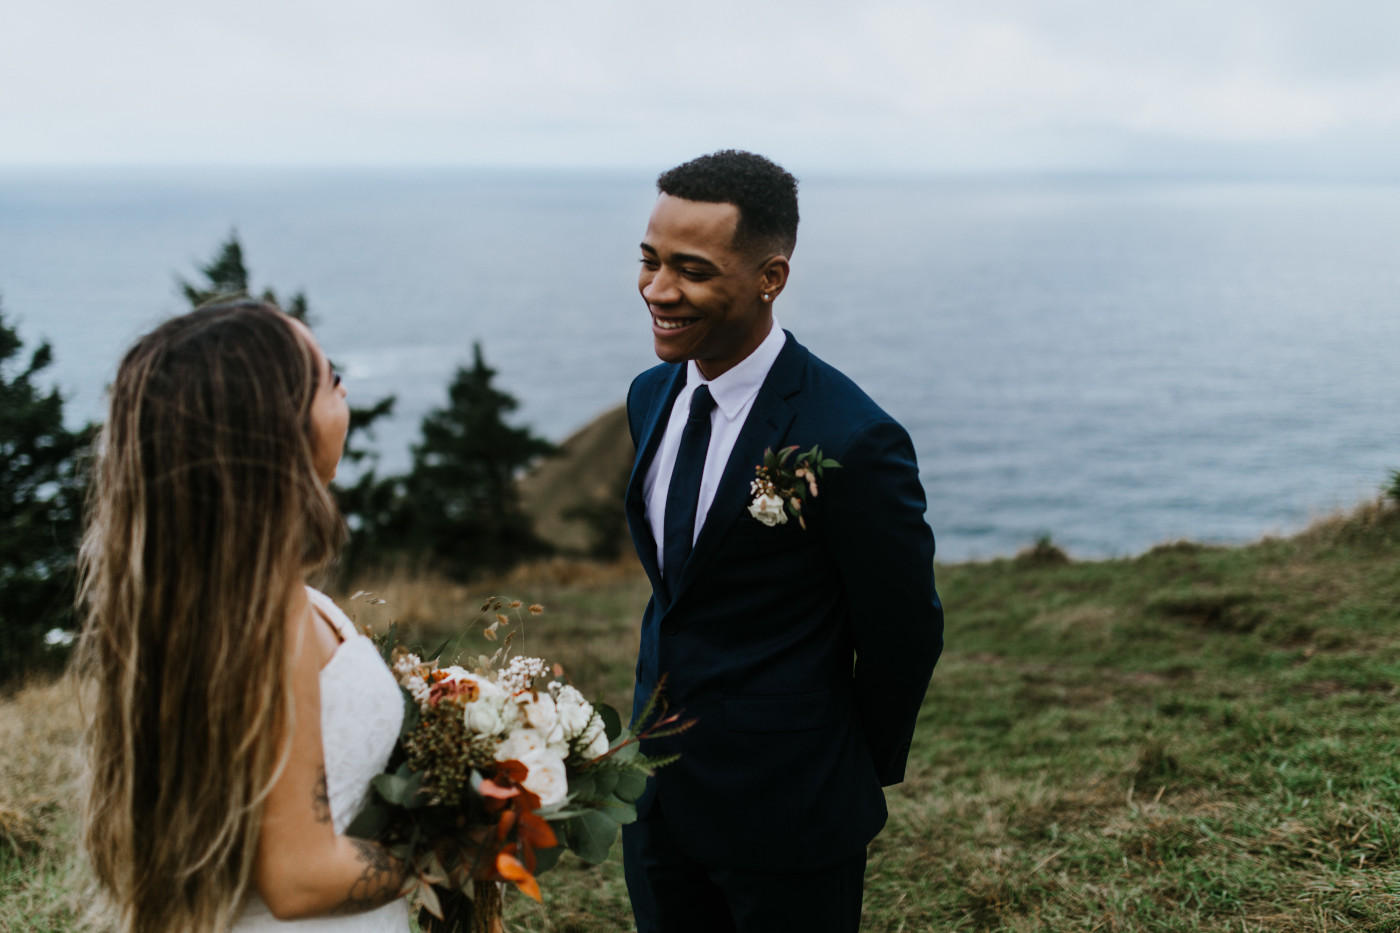 Deandre and Ariana standing during their elopement ceremony. Elopement photography at Mount Hood by Sienna Plus Josh.